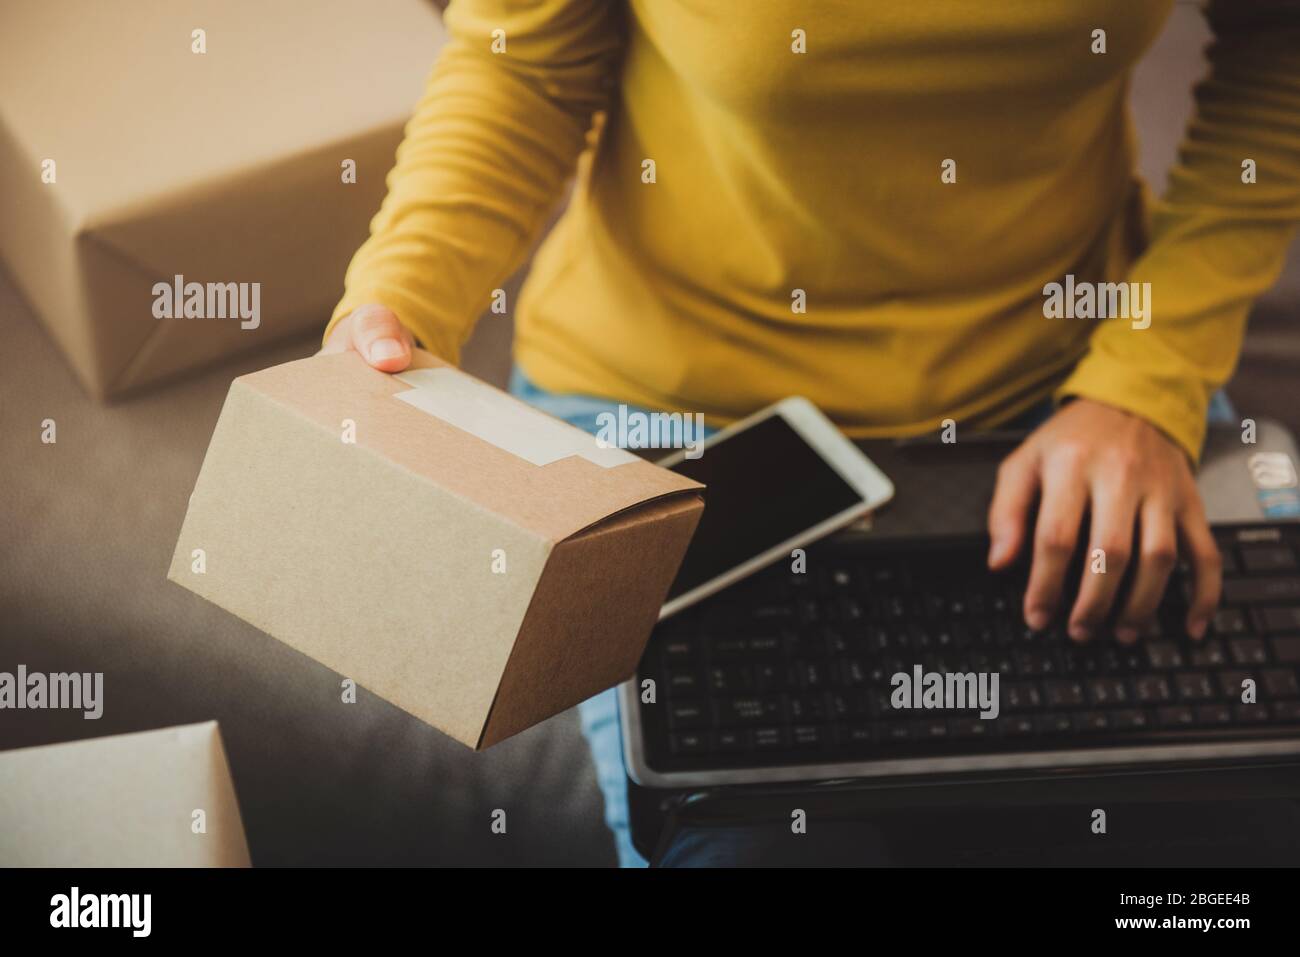 Woman holds a box to prepare to deliver to the customer according to the order at home.Work from home and marketing online or startup small business c Stock Photo